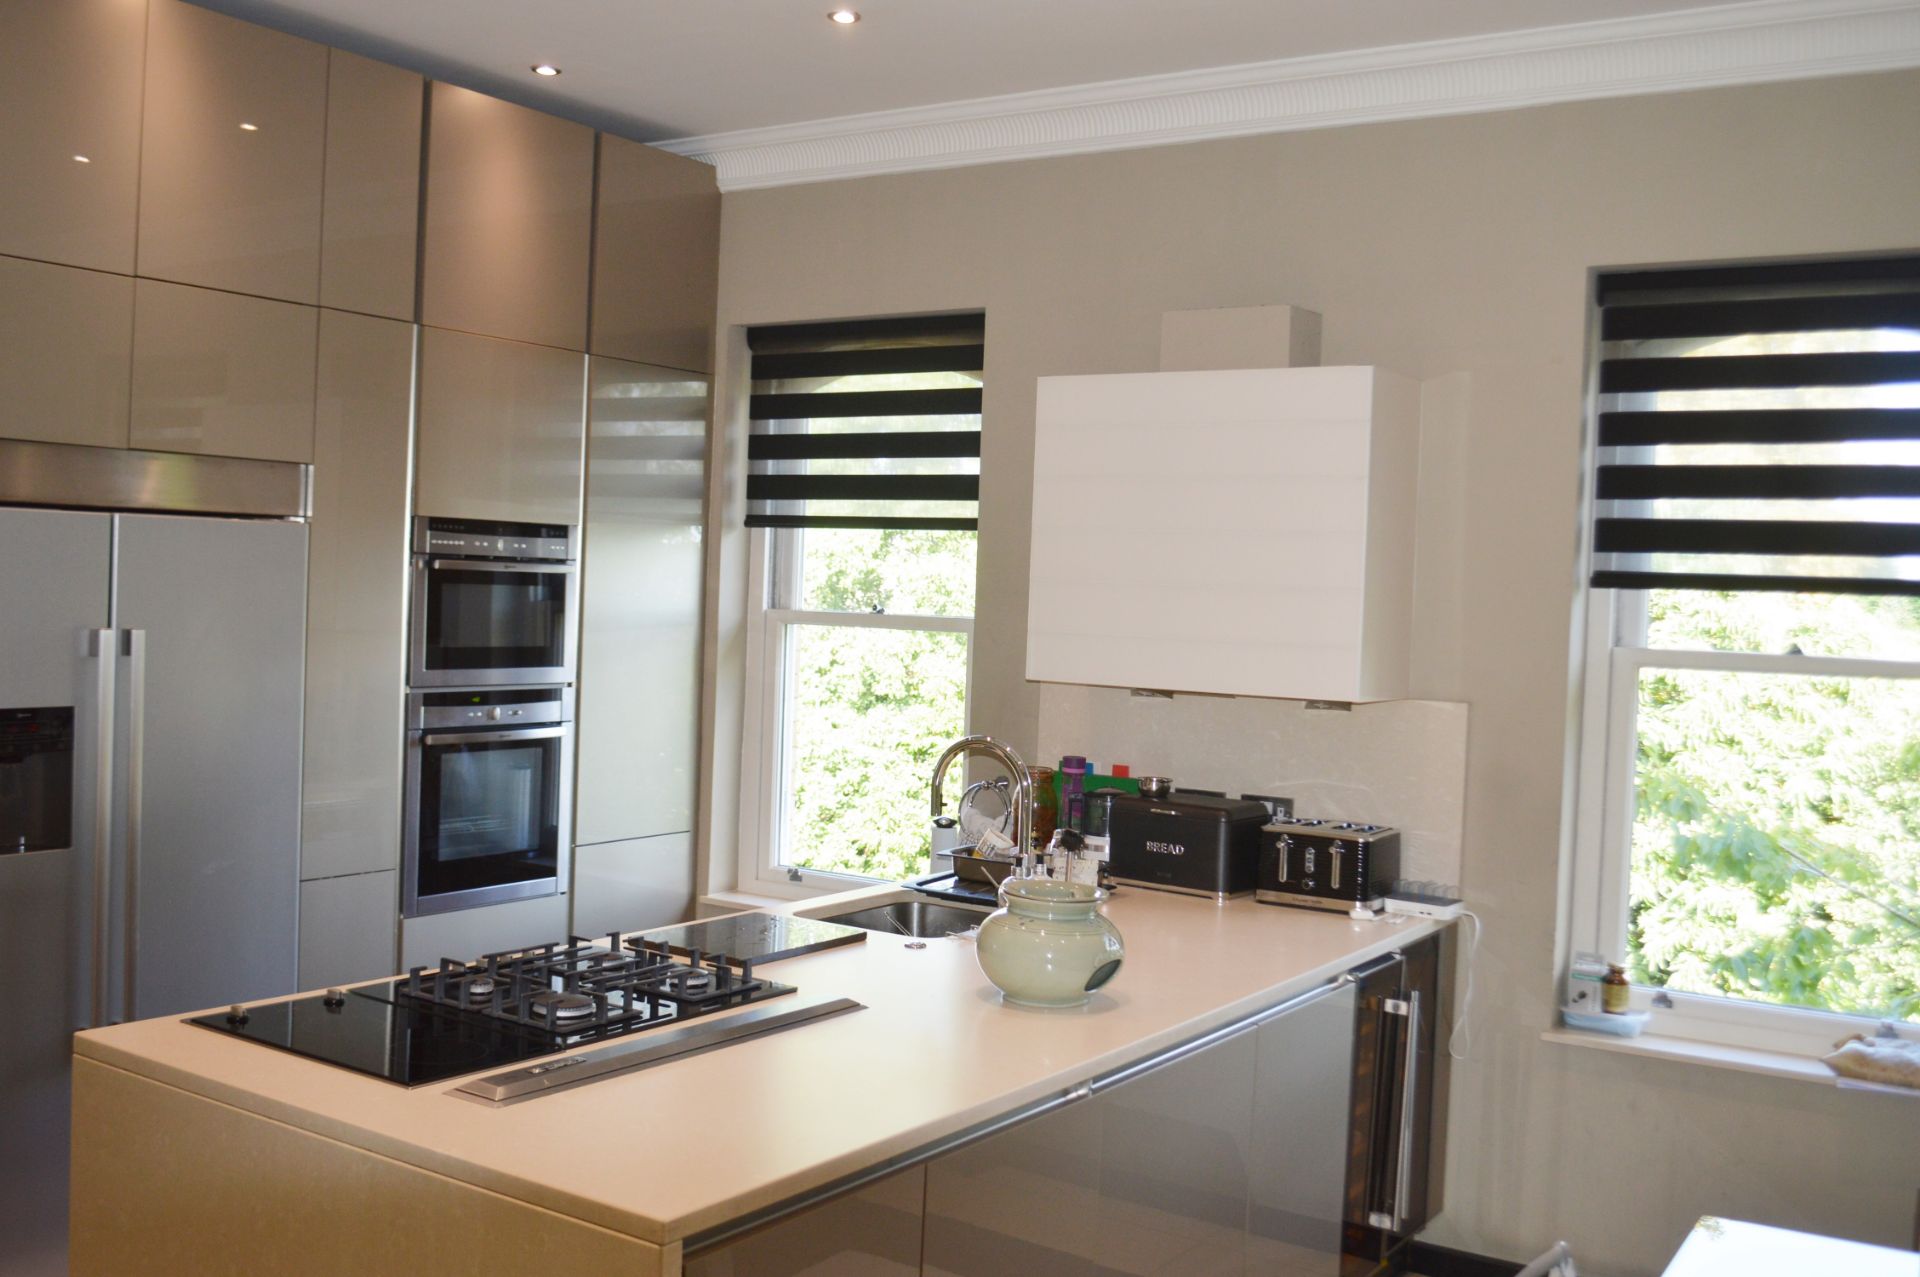 1 x Contemporary Bespoke Fitted Kitchen With Integrated Neff Branded Appliances To be removed from a - Image 37 of 37